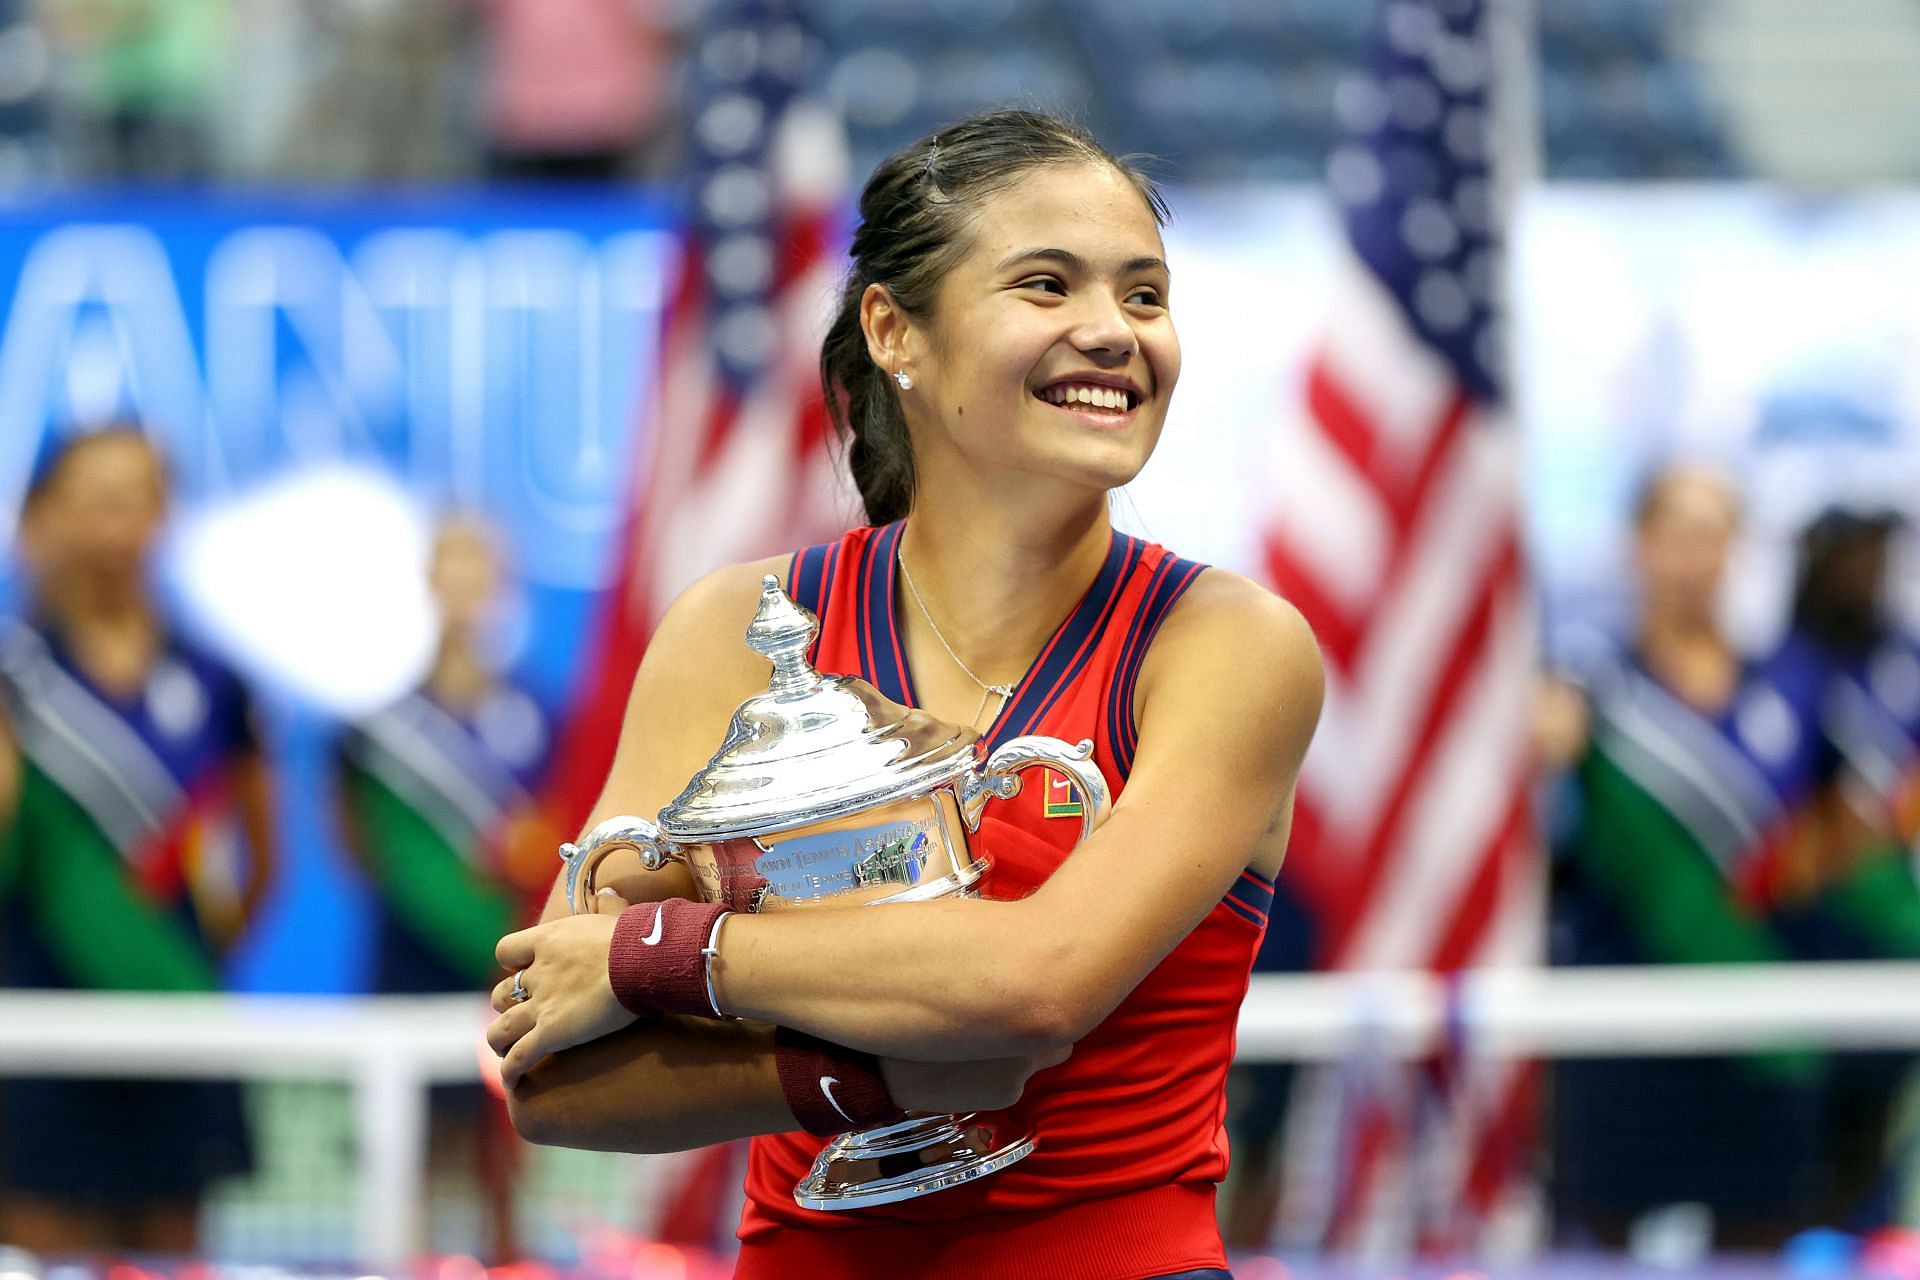 Emma Raducanu with the US Open 2021 trophy